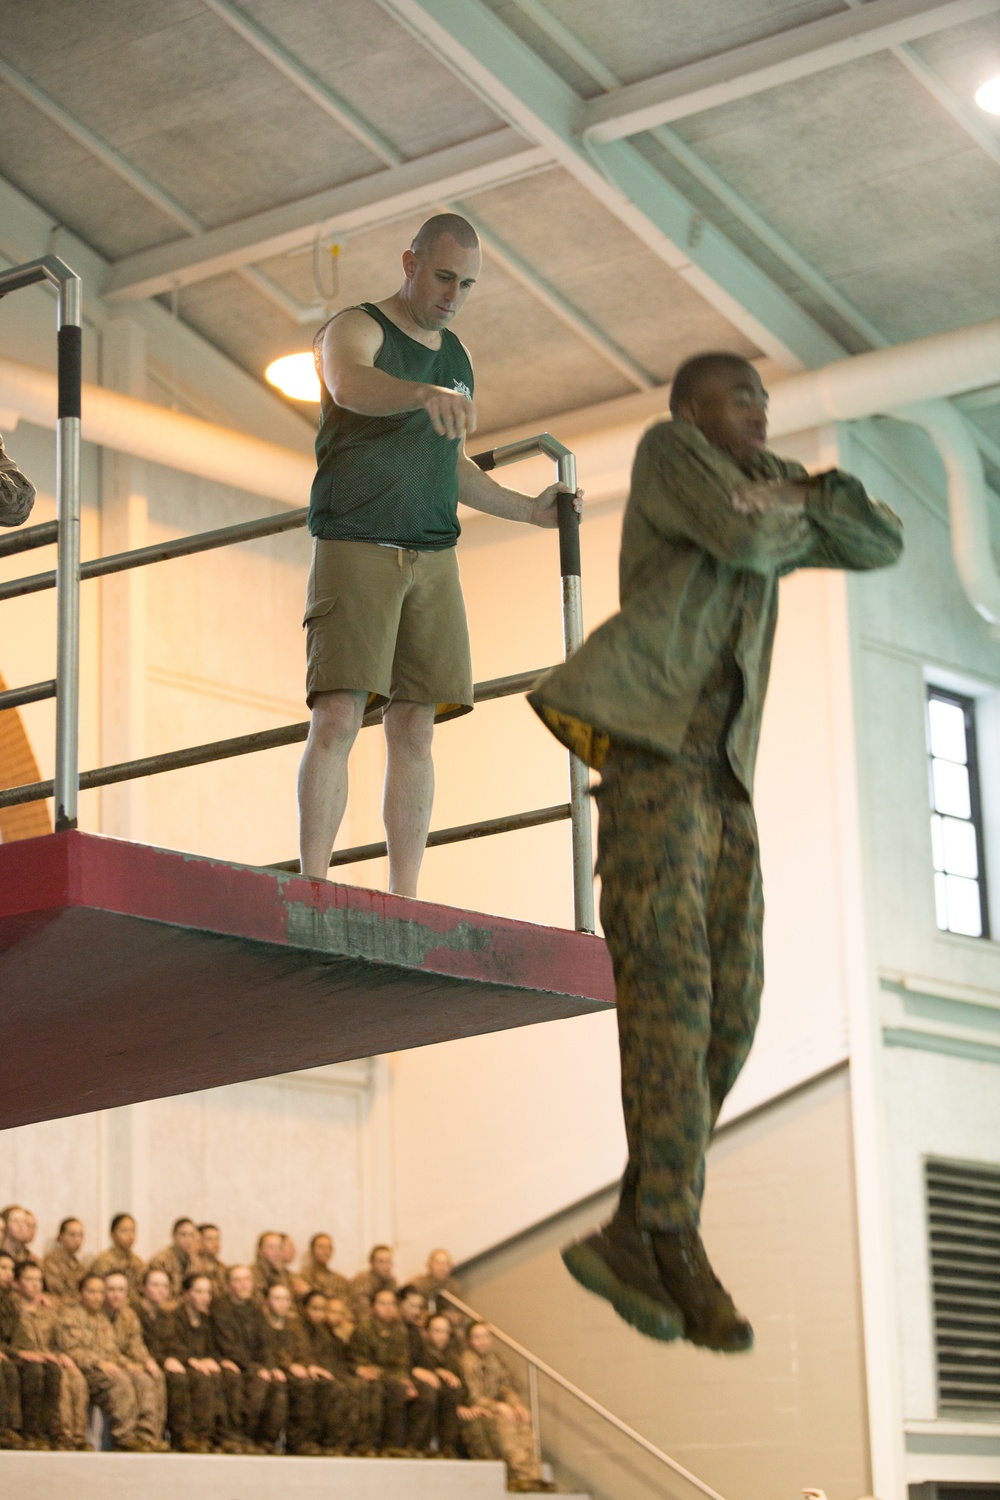 Marine recruits hit the water on Parris Island